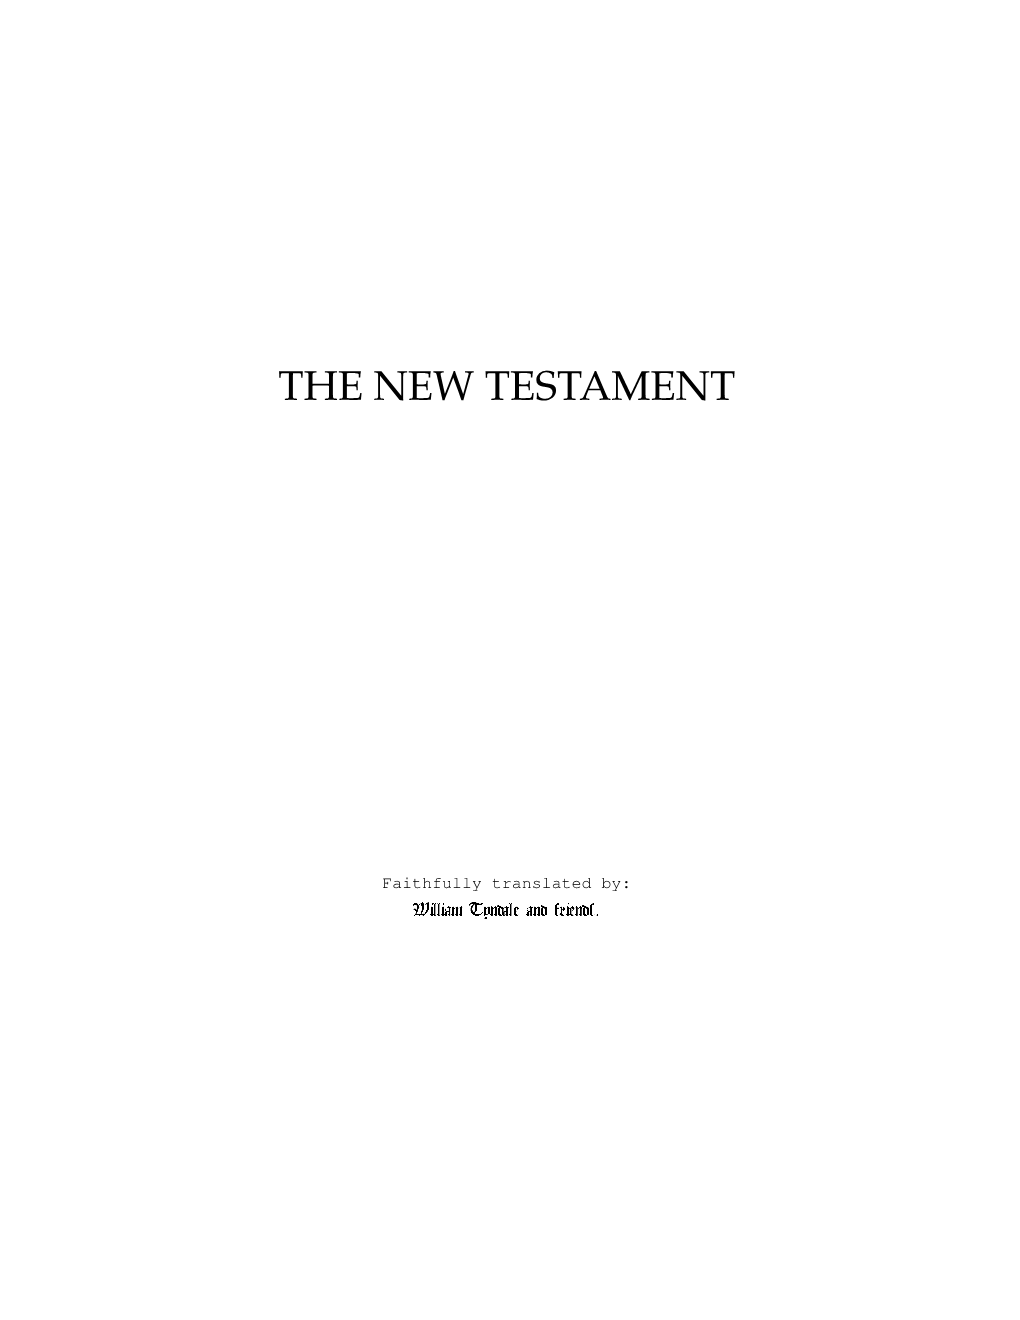 The New Testament Tranlsated by William Tyndale and Friends